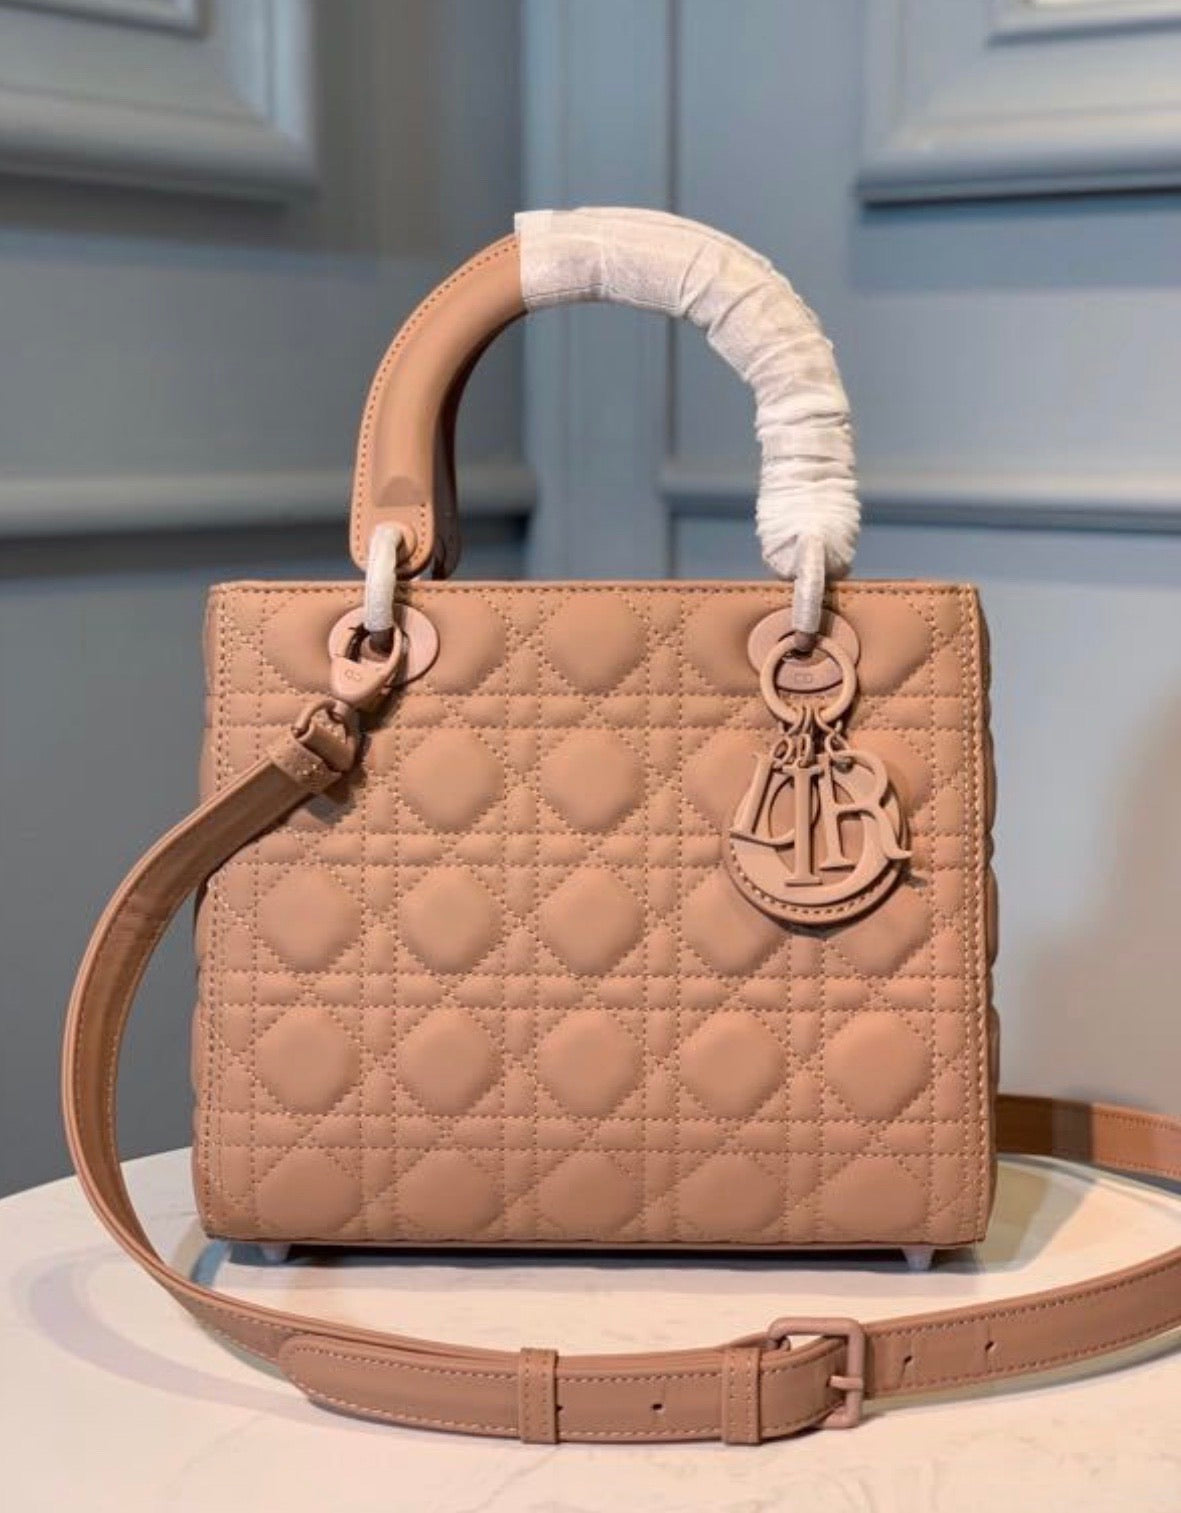 What you need to know before buying the Medium Lady Dior  YouTube